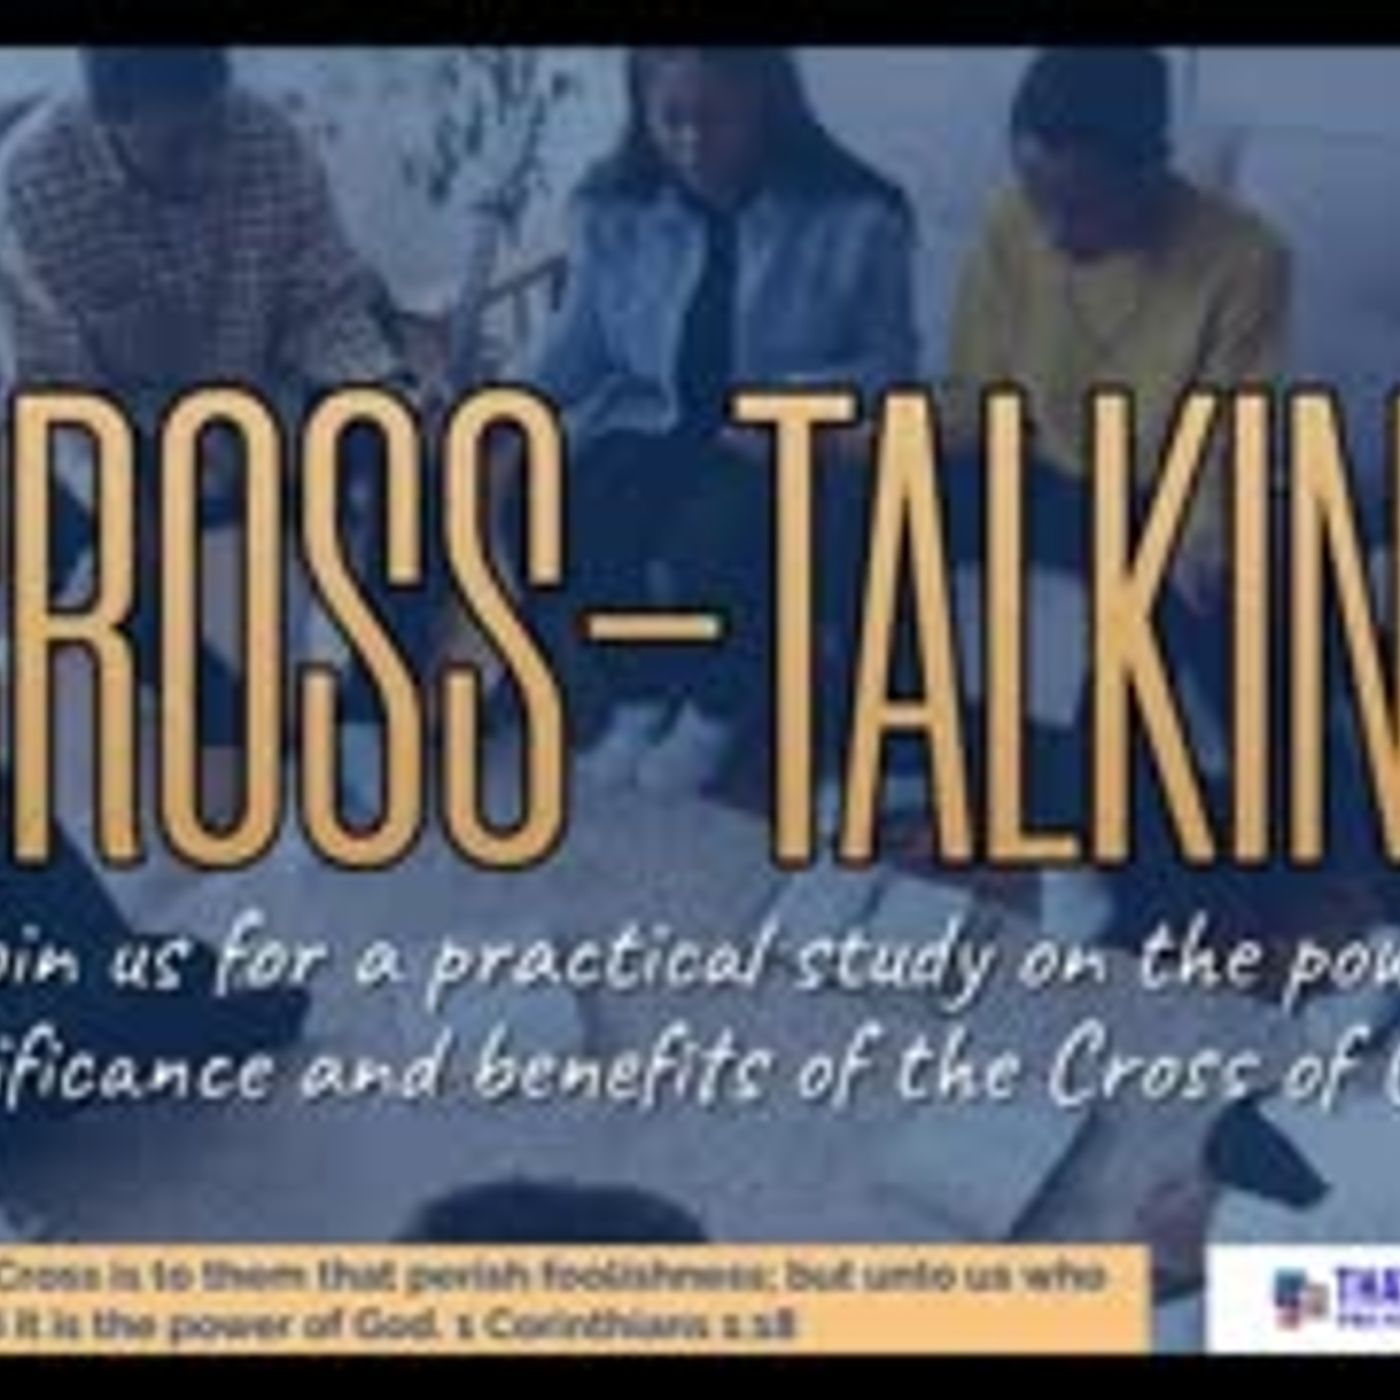 Cross-Talking: Yes, That Old Rugged Cross!